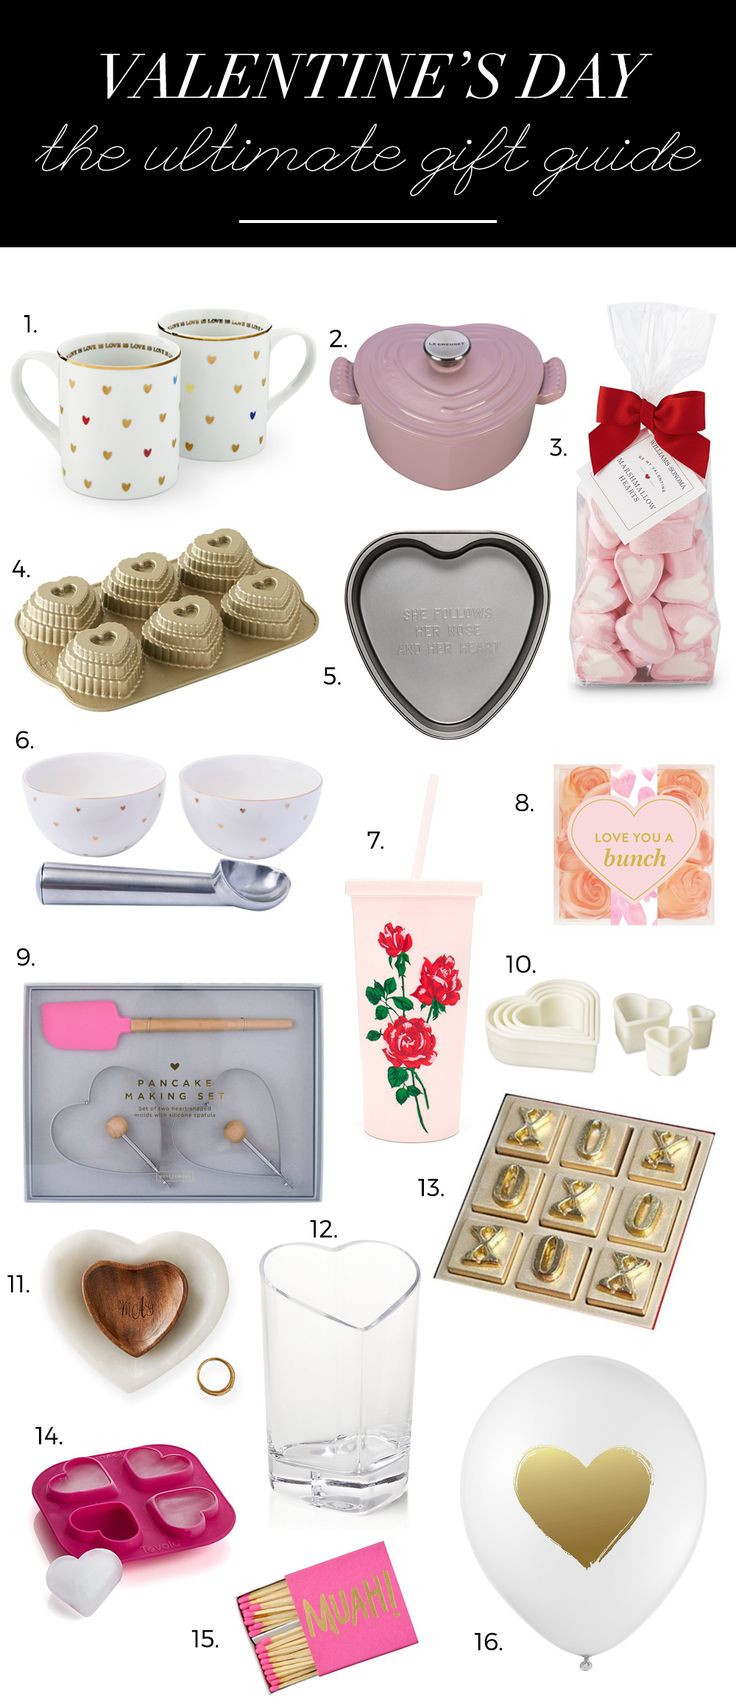 Valentines Day Gift Ideas For Her
 25 best Valentines ideas for her on Pinterest